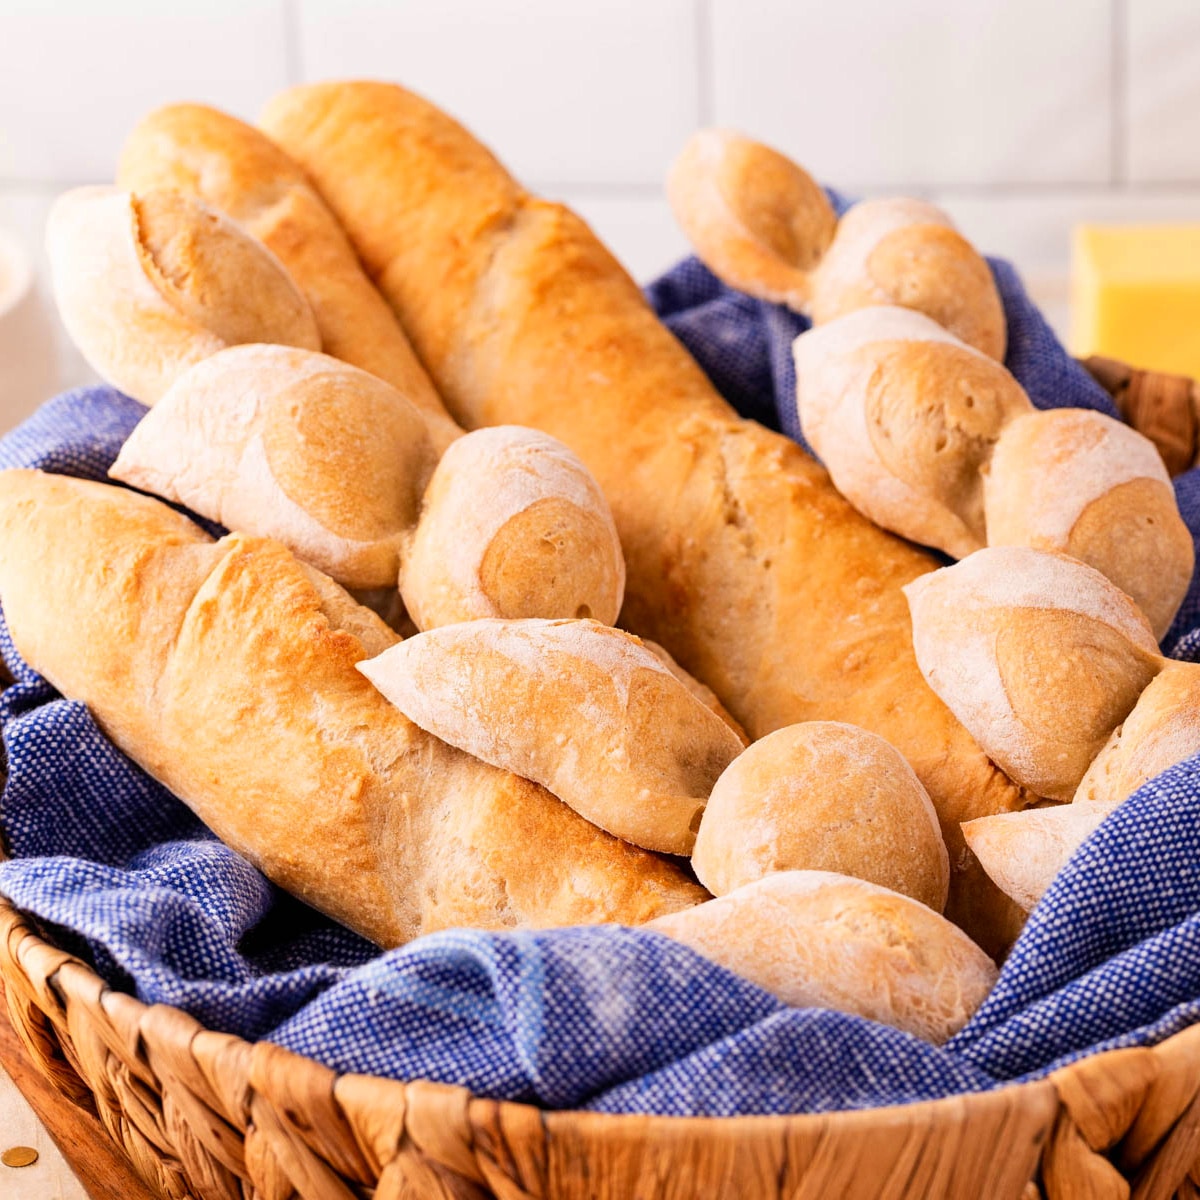 Square photo of baguettes in a basket with a blue tea towel. 